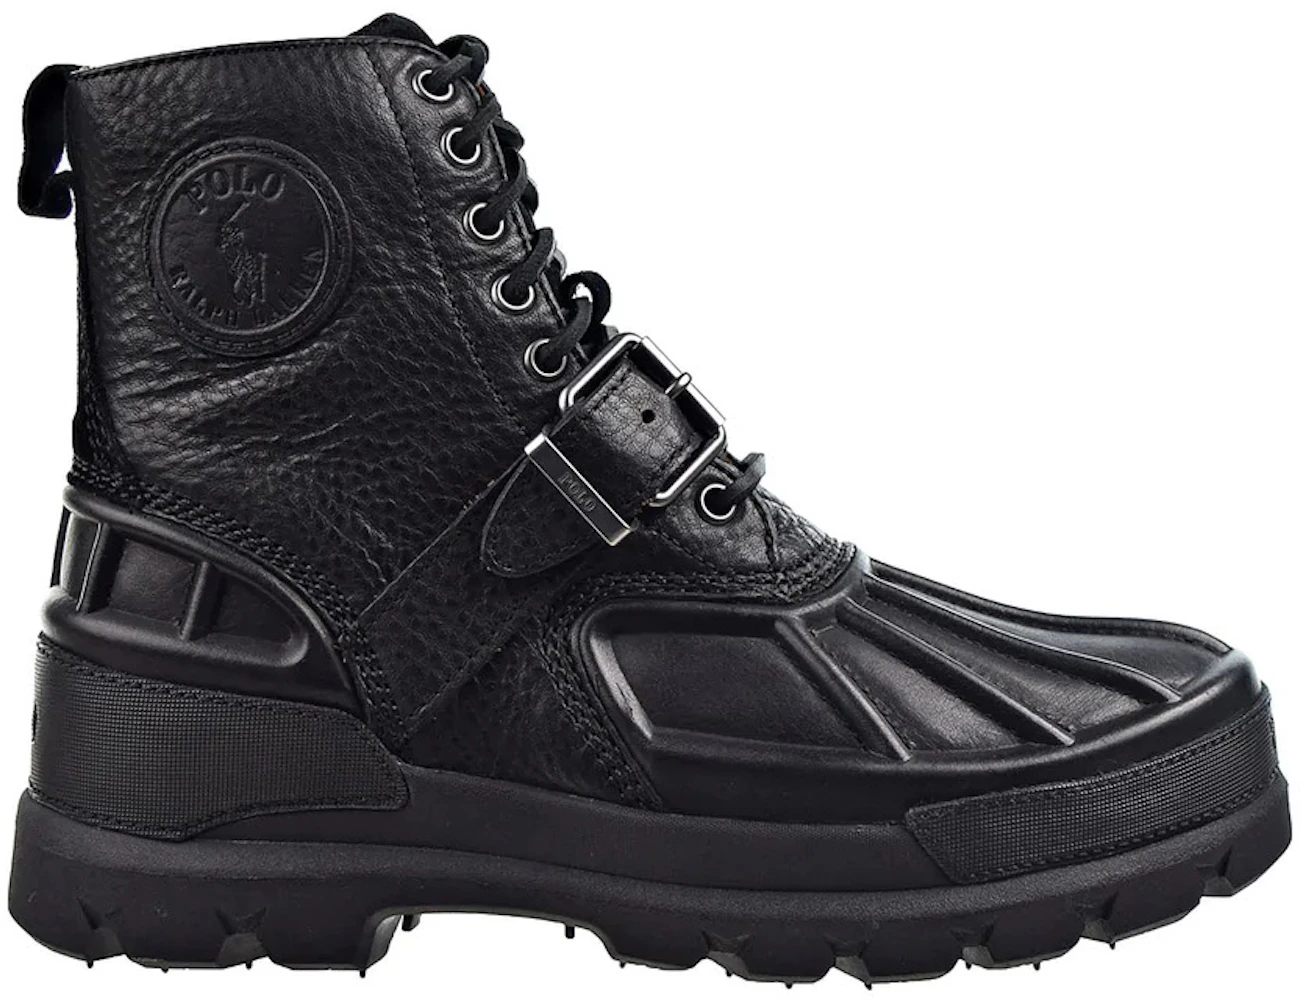 Polo Ralph Lauren Oslo High Oiled Leather Boot Black - 812845450-002 - US